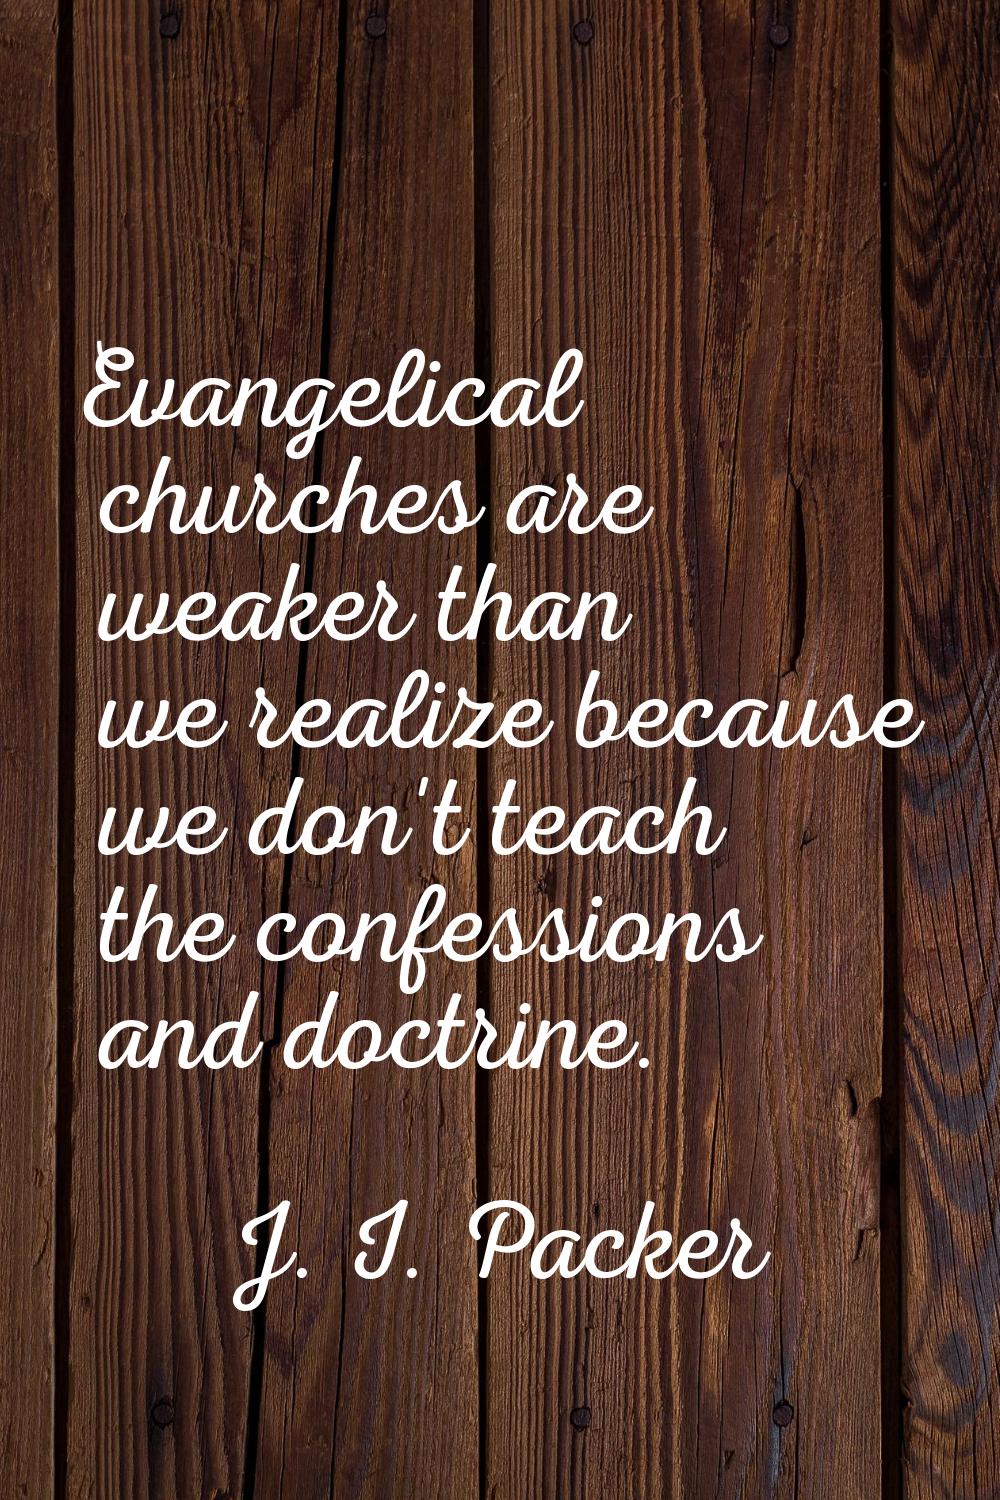 Evangelical churches are weaker than we realize because we don't teach the confessions and doctrine